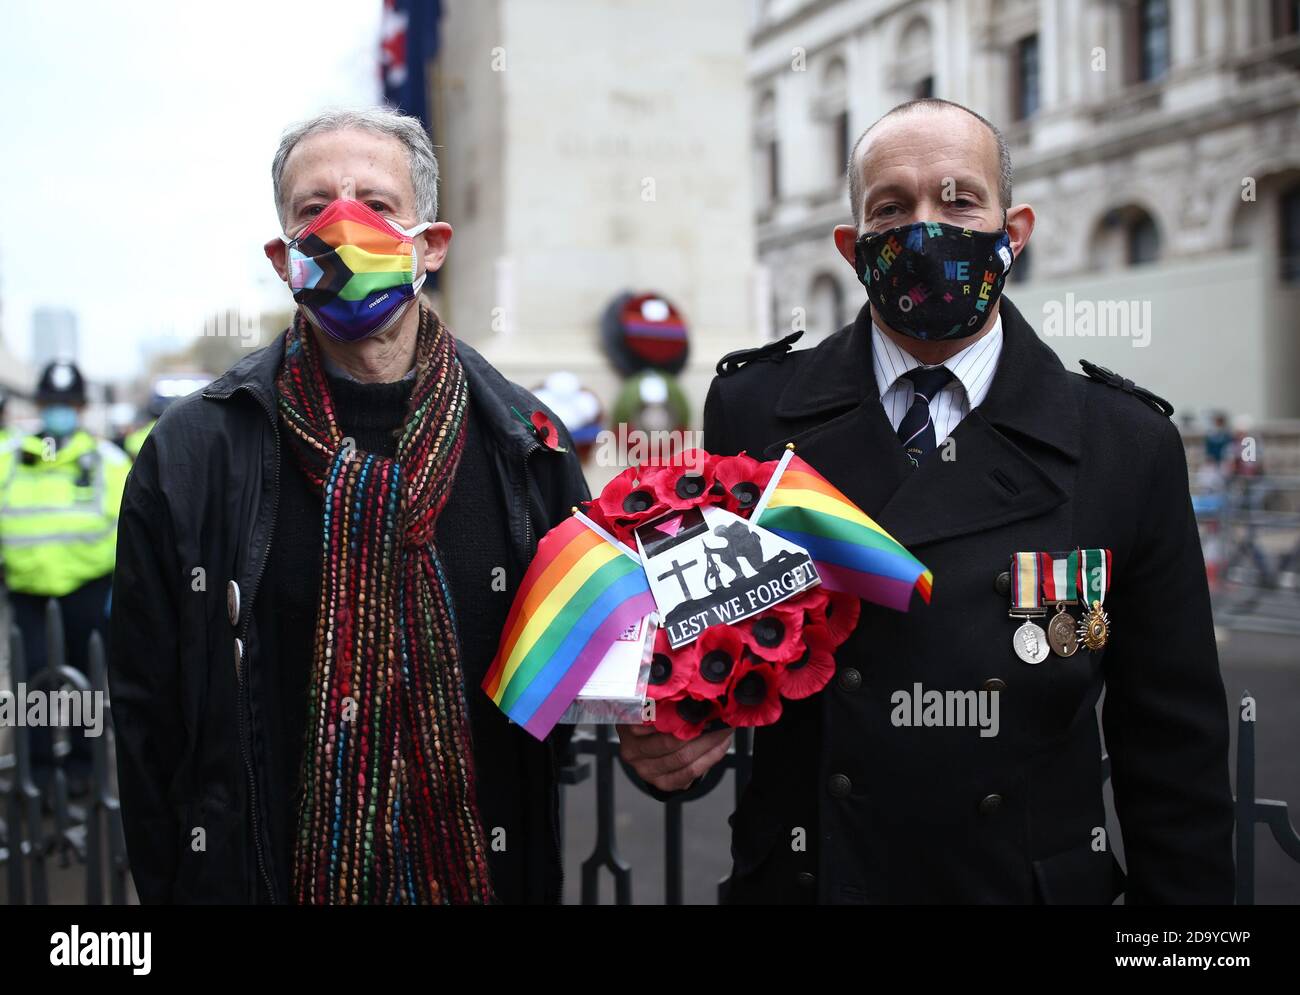 Royal Air Force veteran David Bonney (right) and human rights campaigner Peter Tatchell lay a rainbow wreath at the Cenotaph, in Whitehall, London, following the Remembrance Sunday service. Stock Photo